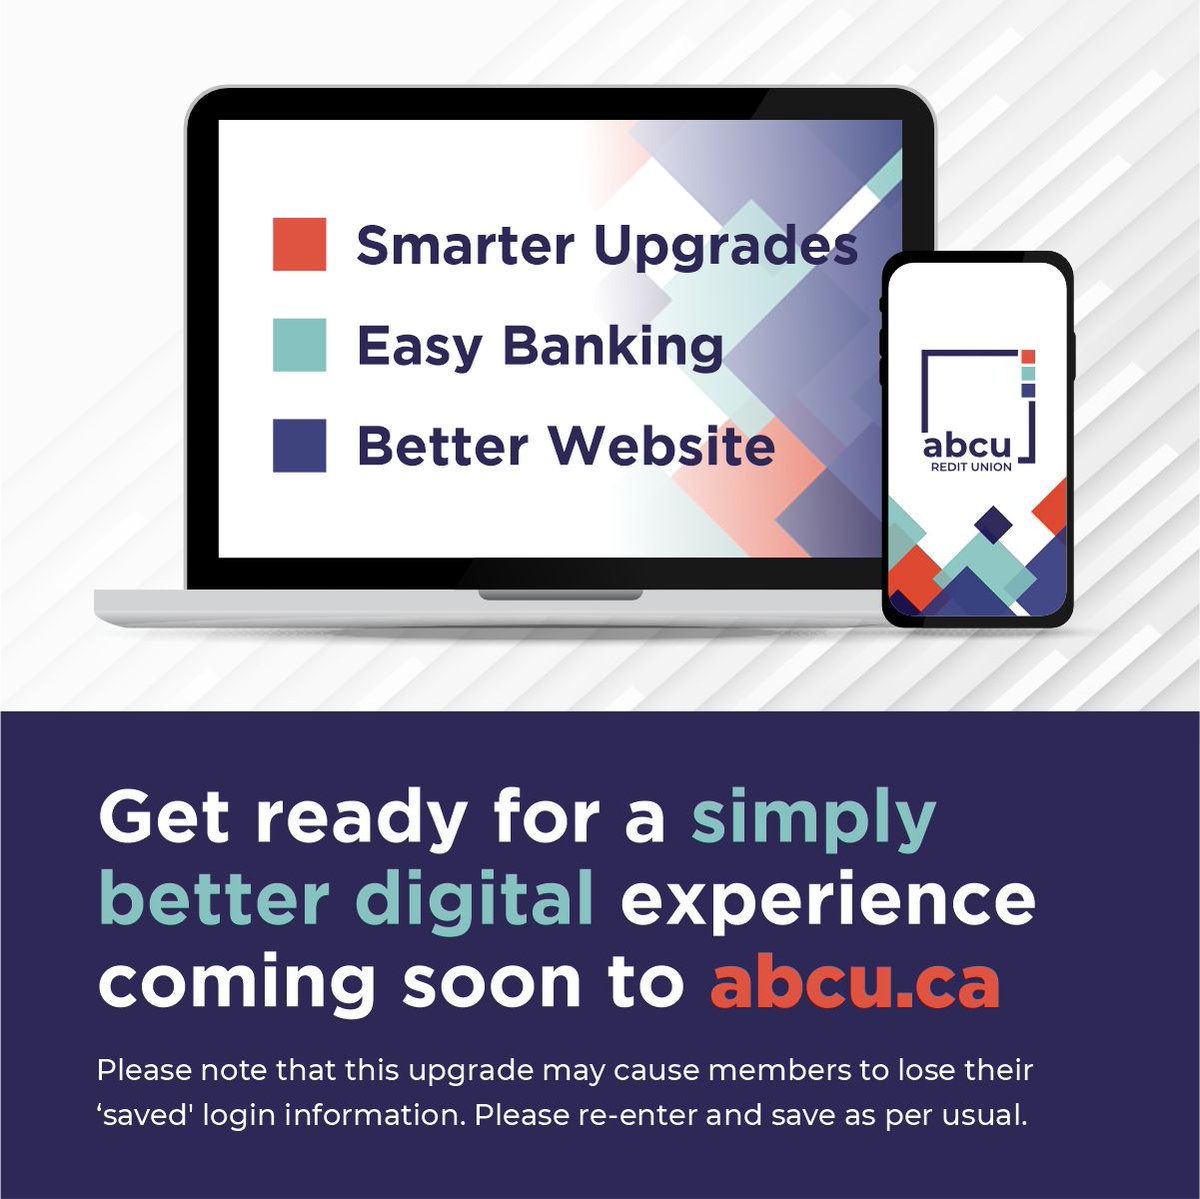 Your ABCU online banking experience is about to become:

✅Smarter
✅Easier
✅Better

With our new website and online banking system launching soon!

Details: abcu.ca/Personal/About…

#DigitalBanking #DigitalGlowUp #SimplyBetterBanking #SmarterEasierBetterOnlineBanking